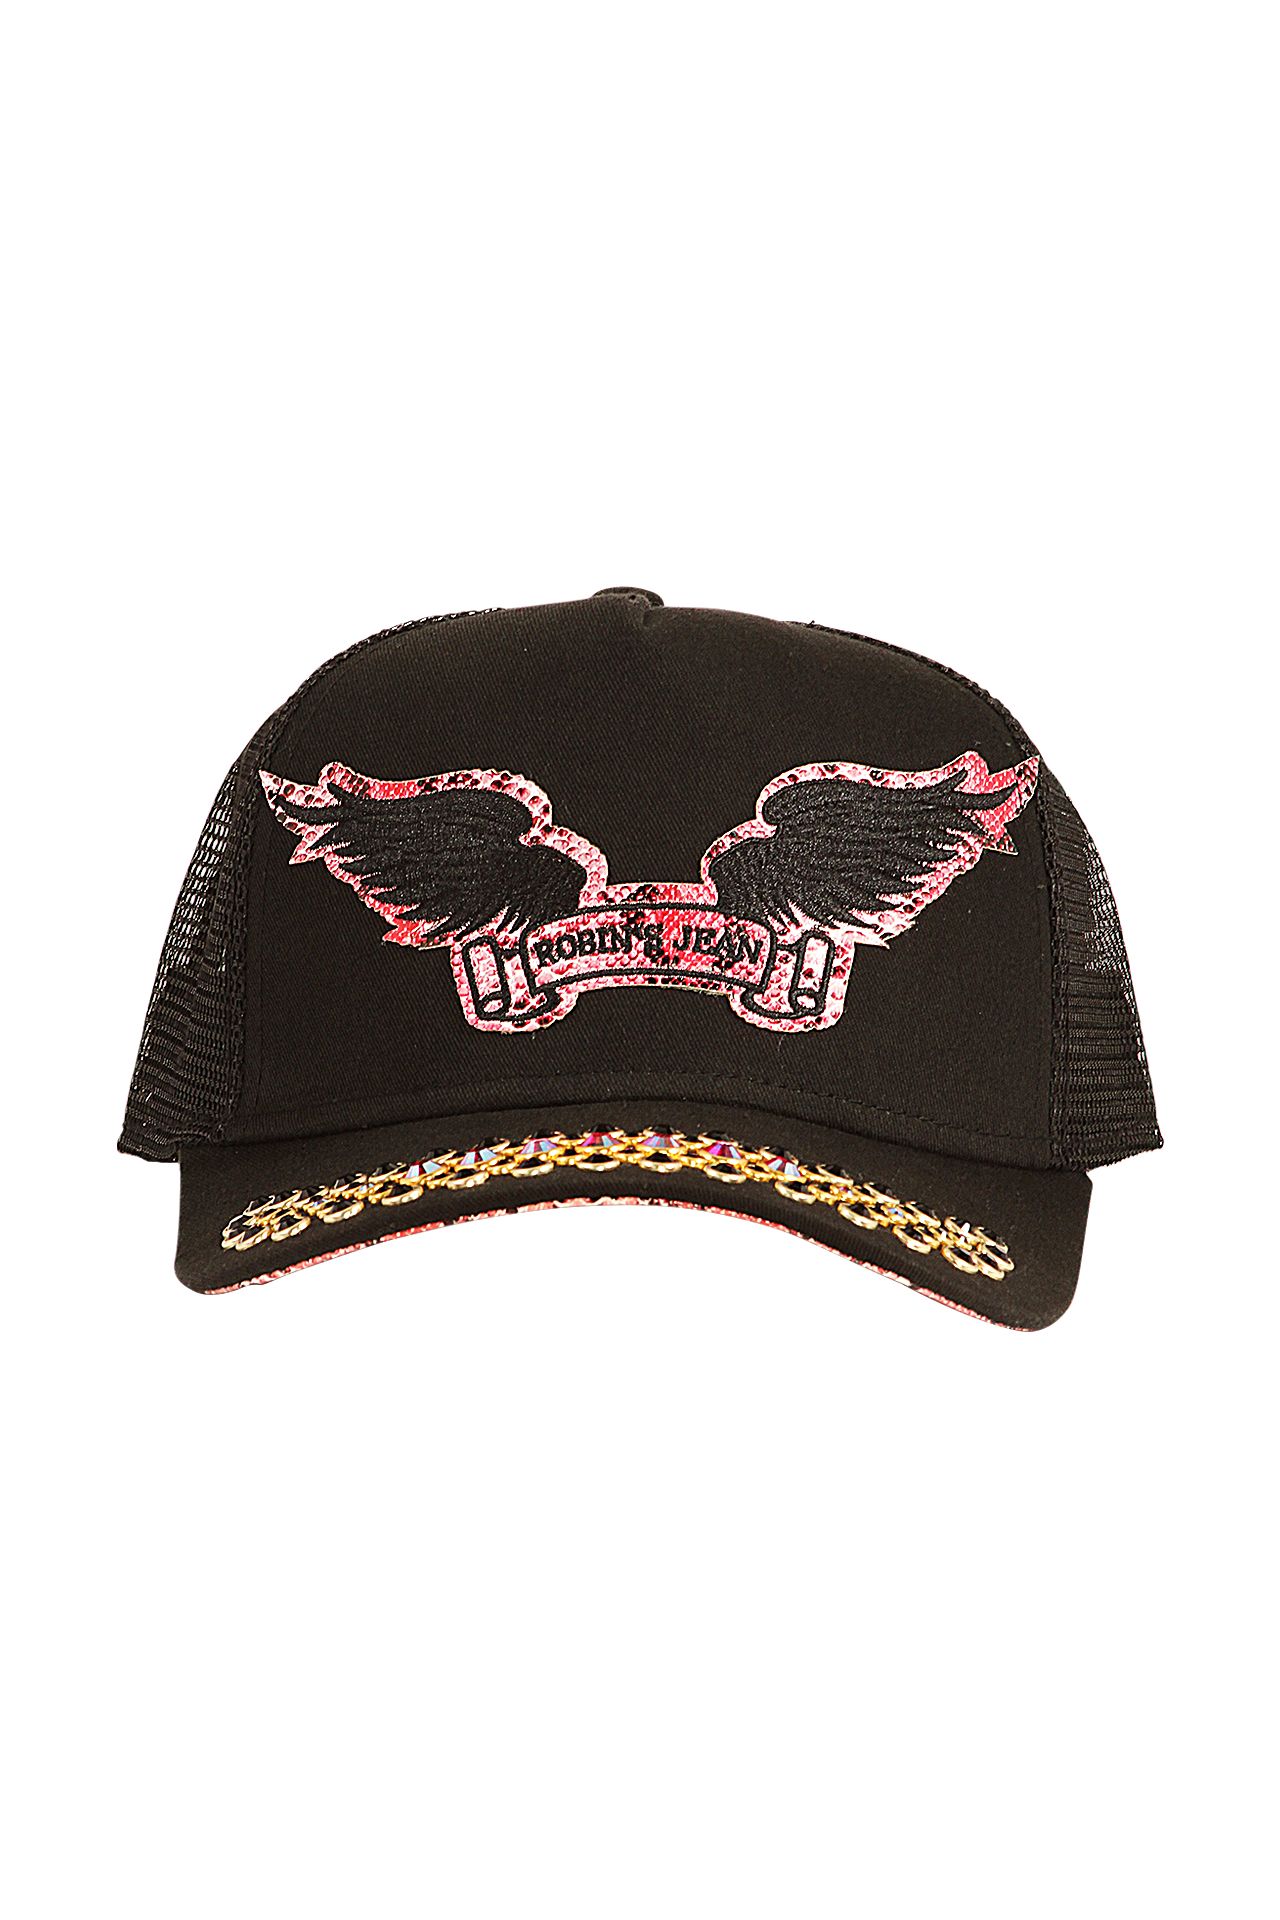 BLACK TRUCKER IN HOT PINK VIPER WITH BLACK & RED CRYSTALS